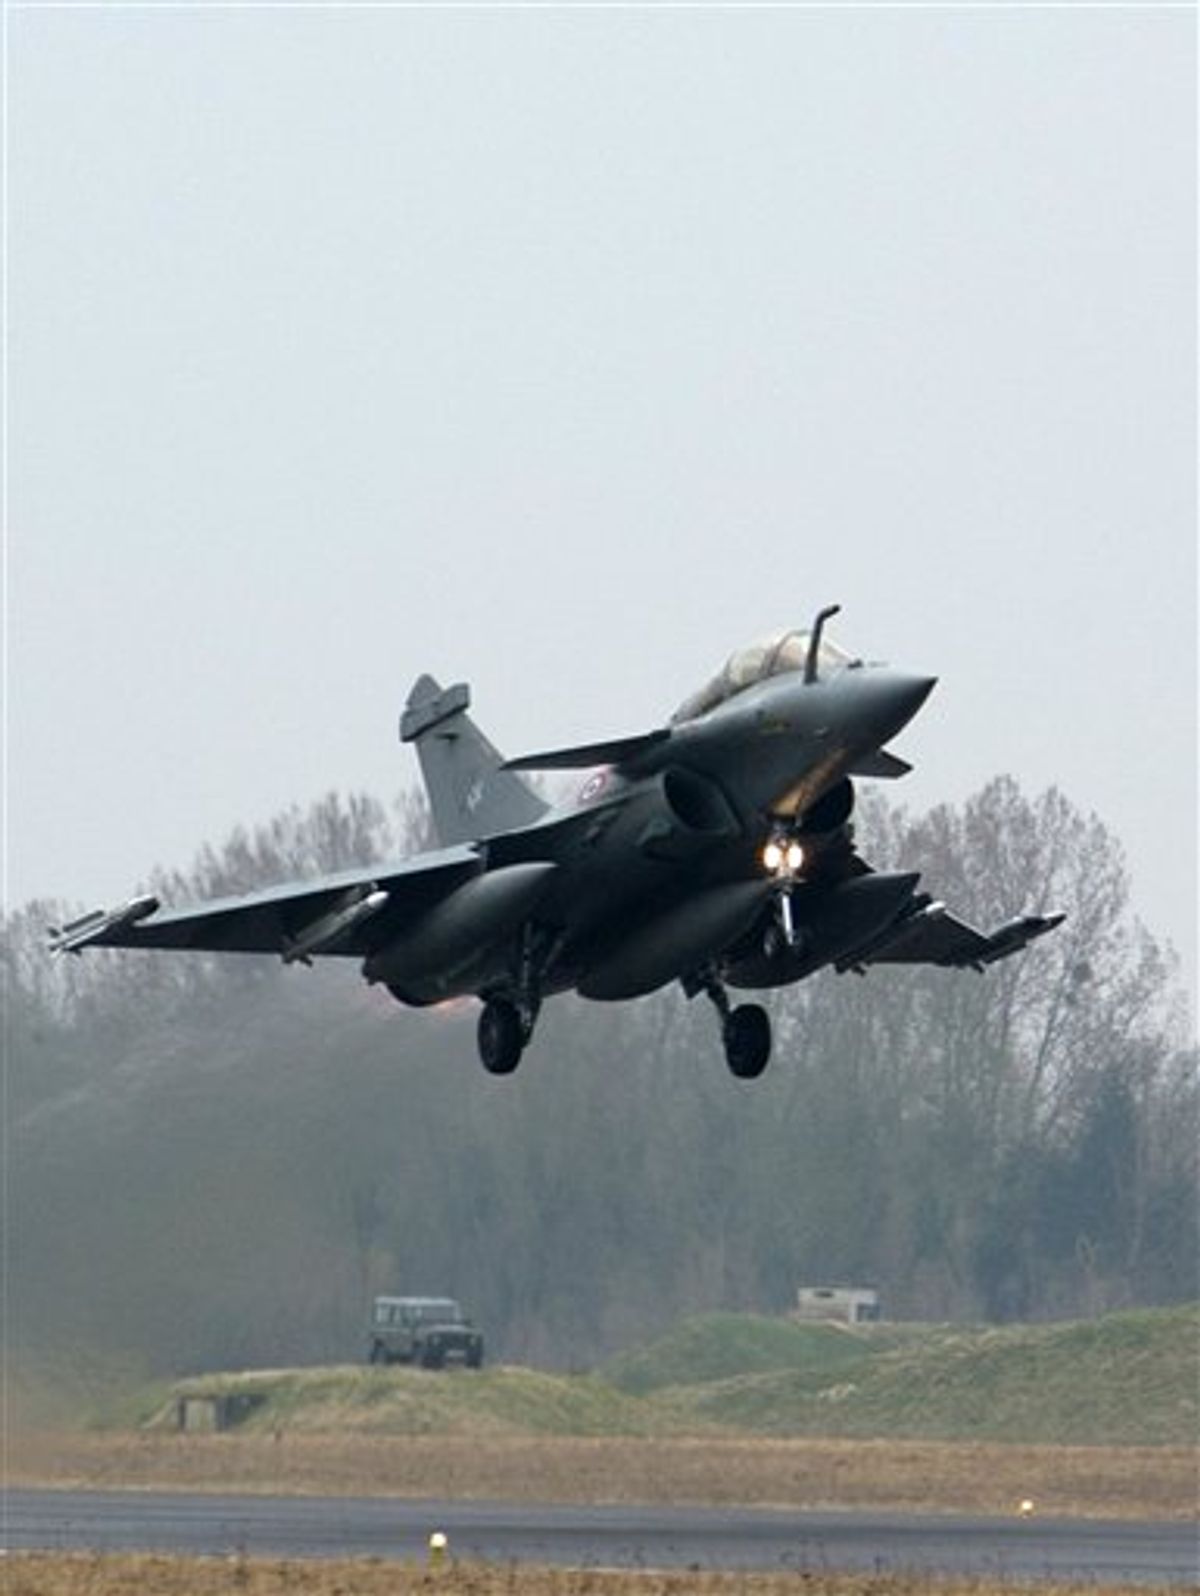 A rafale jet fighter takes off at the military base of Saint Dizier, eastern France, Saturday, March 19, 2011. Top officials from the United States, Europe and the Arab world have launched immediate military action to protect civilians as Libyan leader Moammar Gadhafi's forces attacked the heart of the country's rebel uprising. (AP Photo/ ECPAD, Sebastien Dupont) NO SALES (AP)